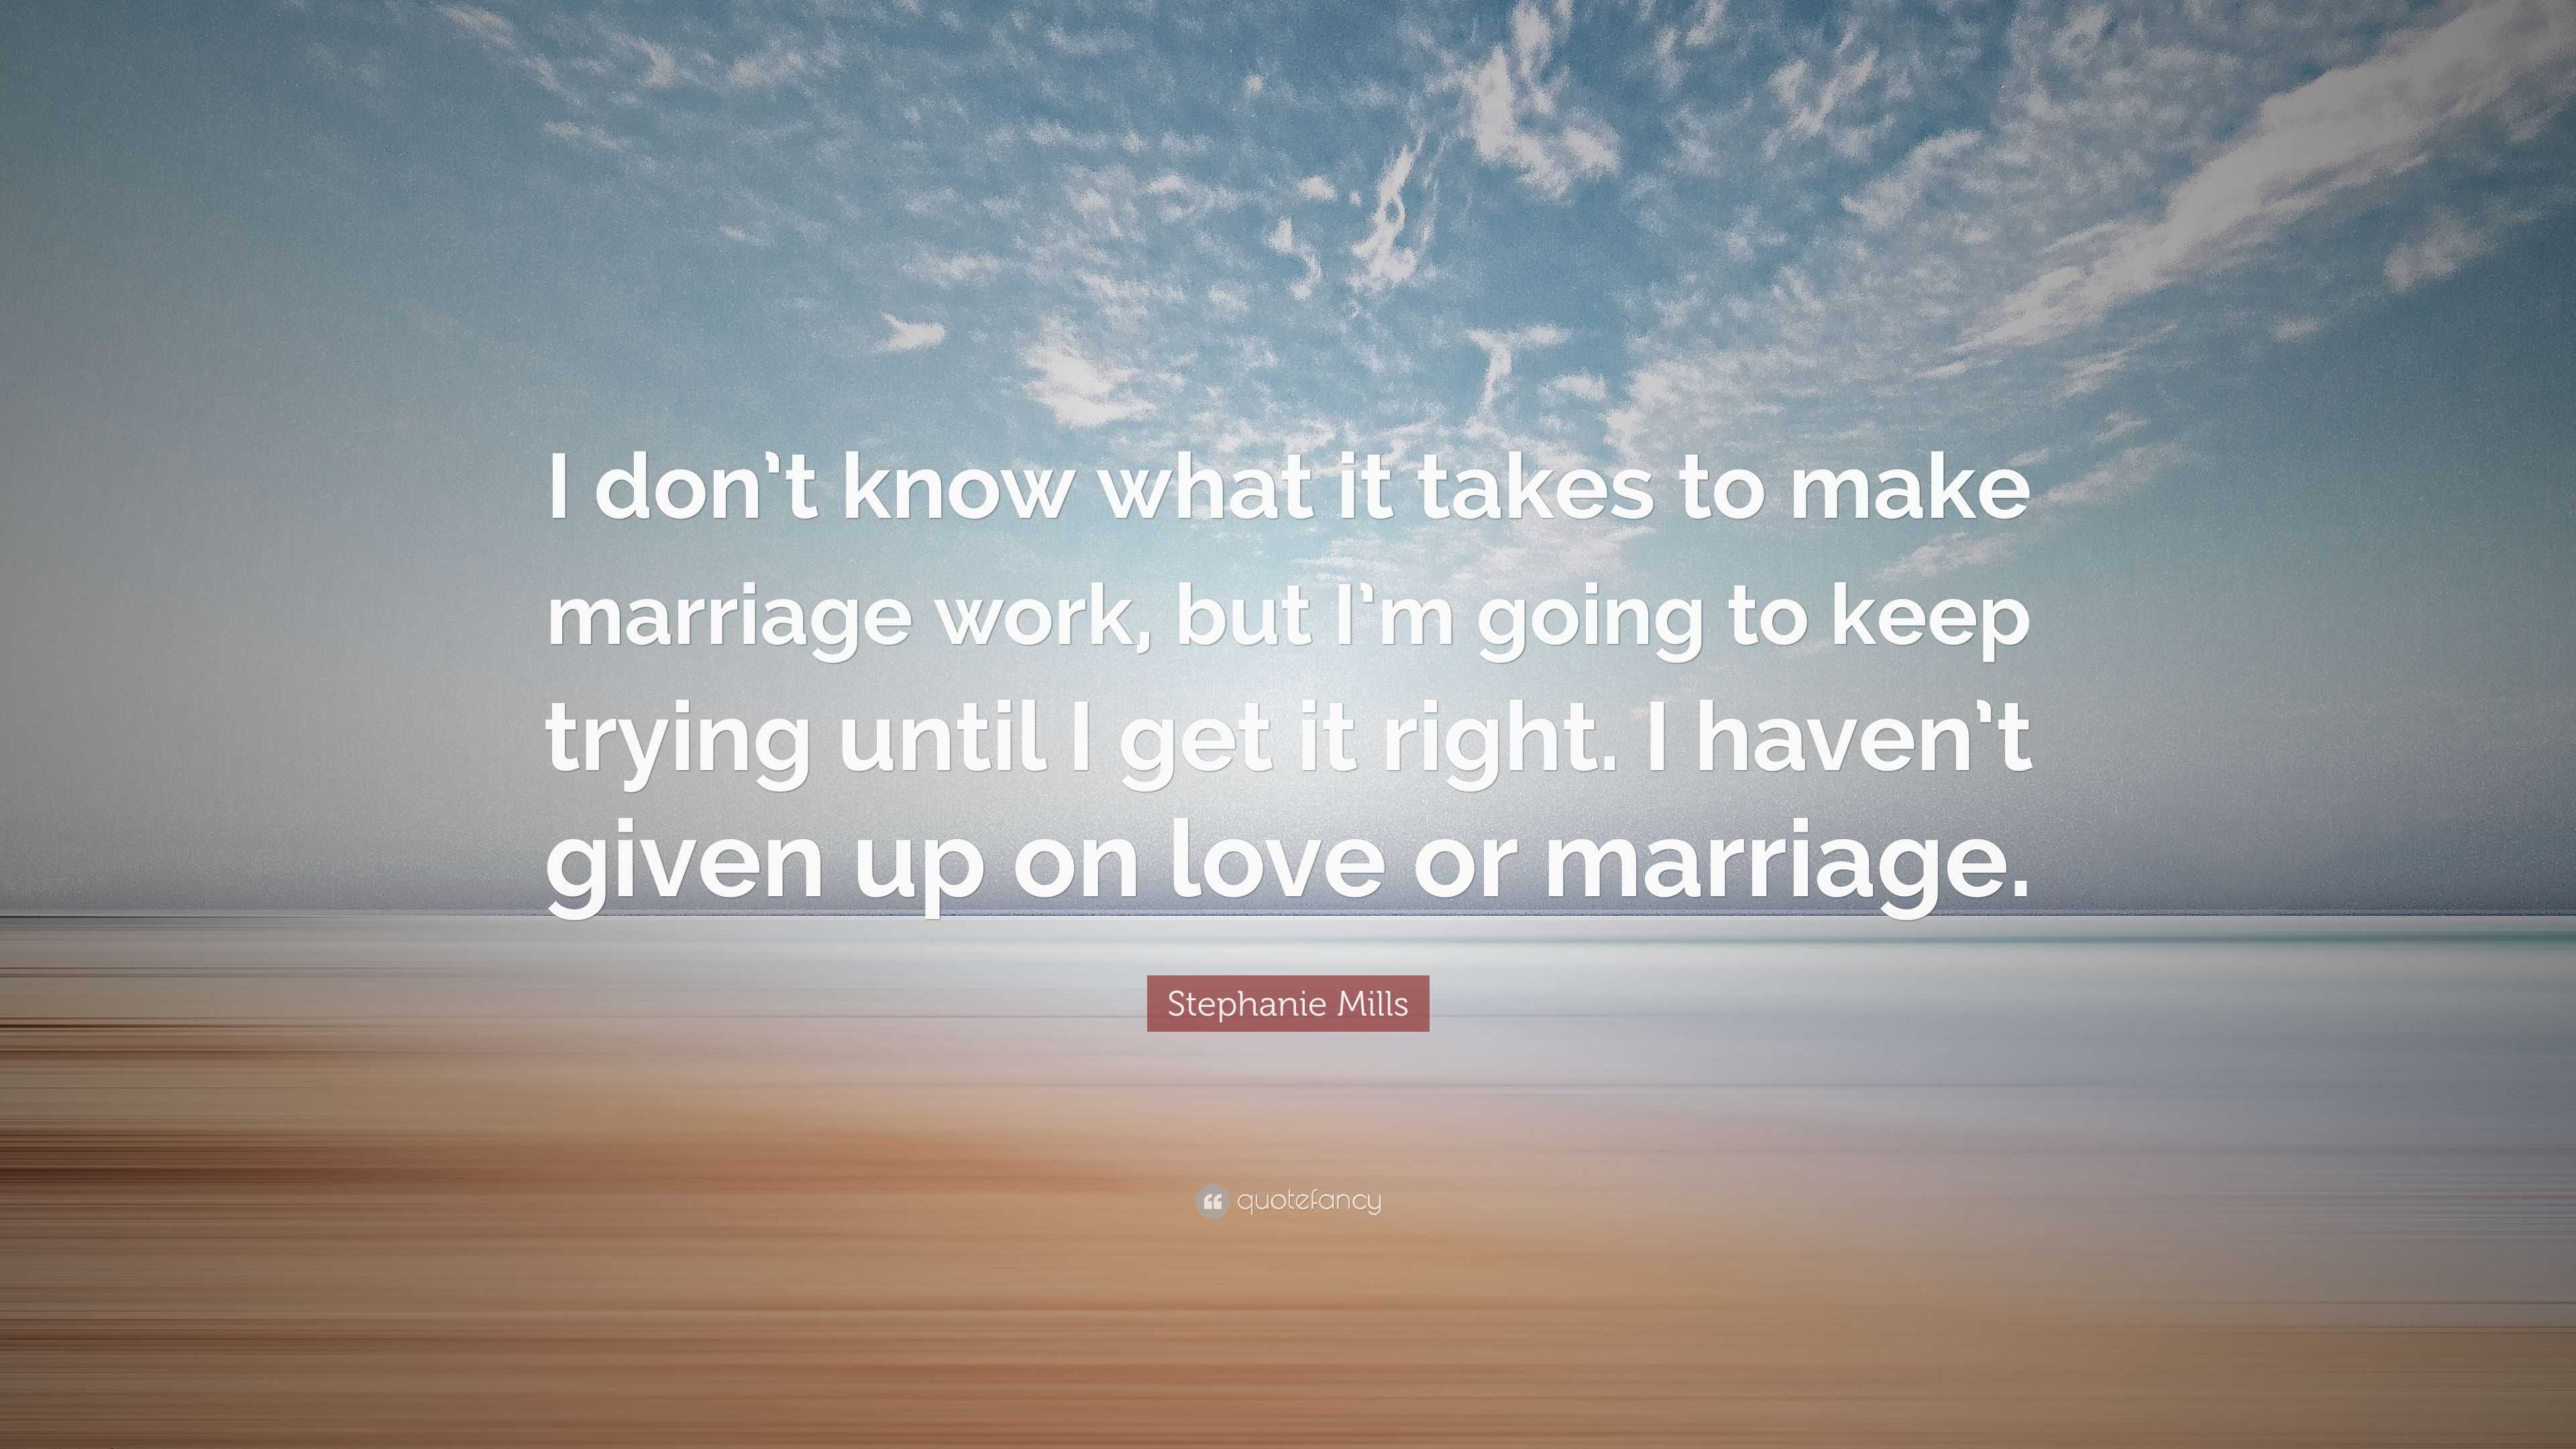 Stephanie Mills Quote: “I don’t know what it takes to make marriage ...